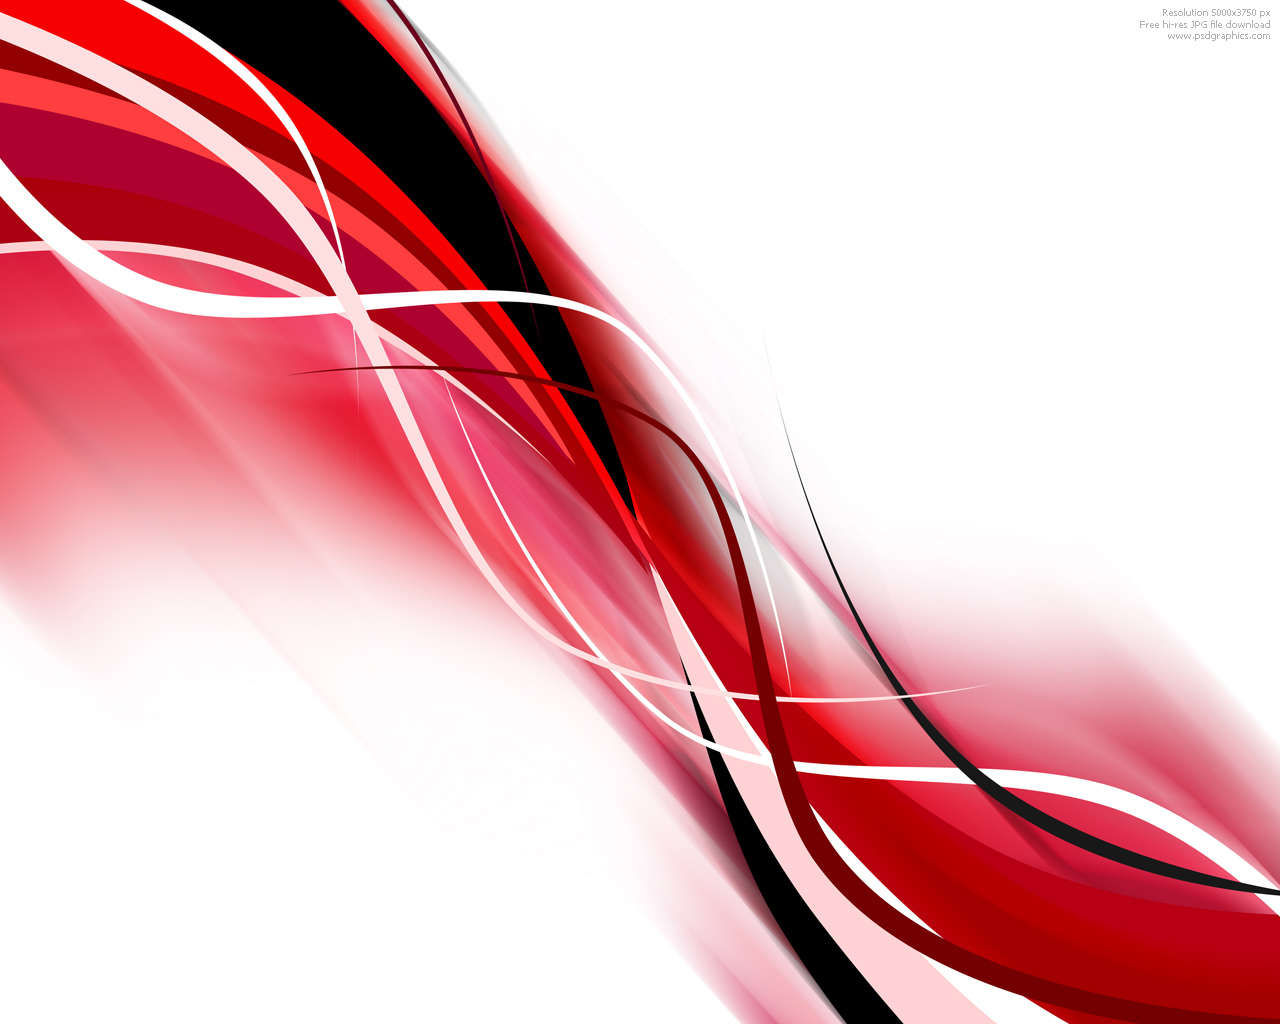 Red and blue abstract waves backgrounds PSDGraphics